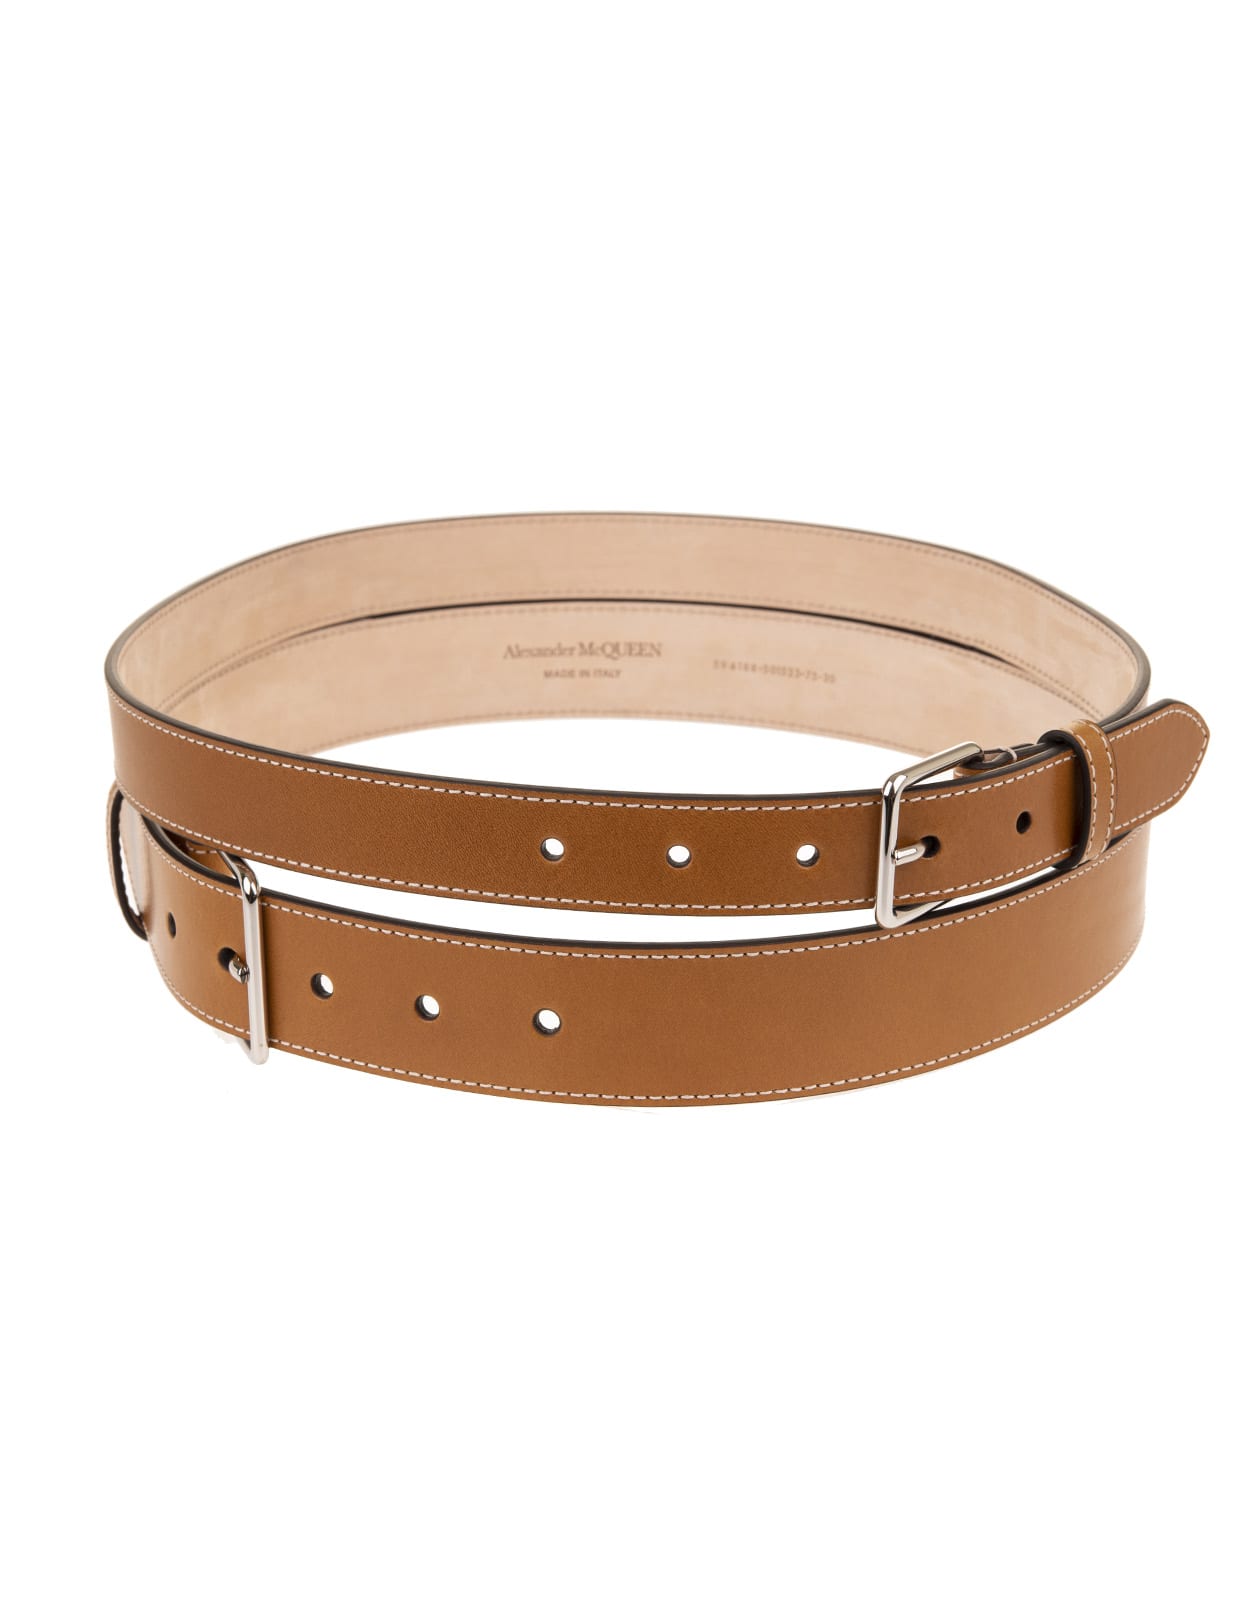 Alexander McQueen Double Belt In Smooth Brown Leather With Silver Buckles